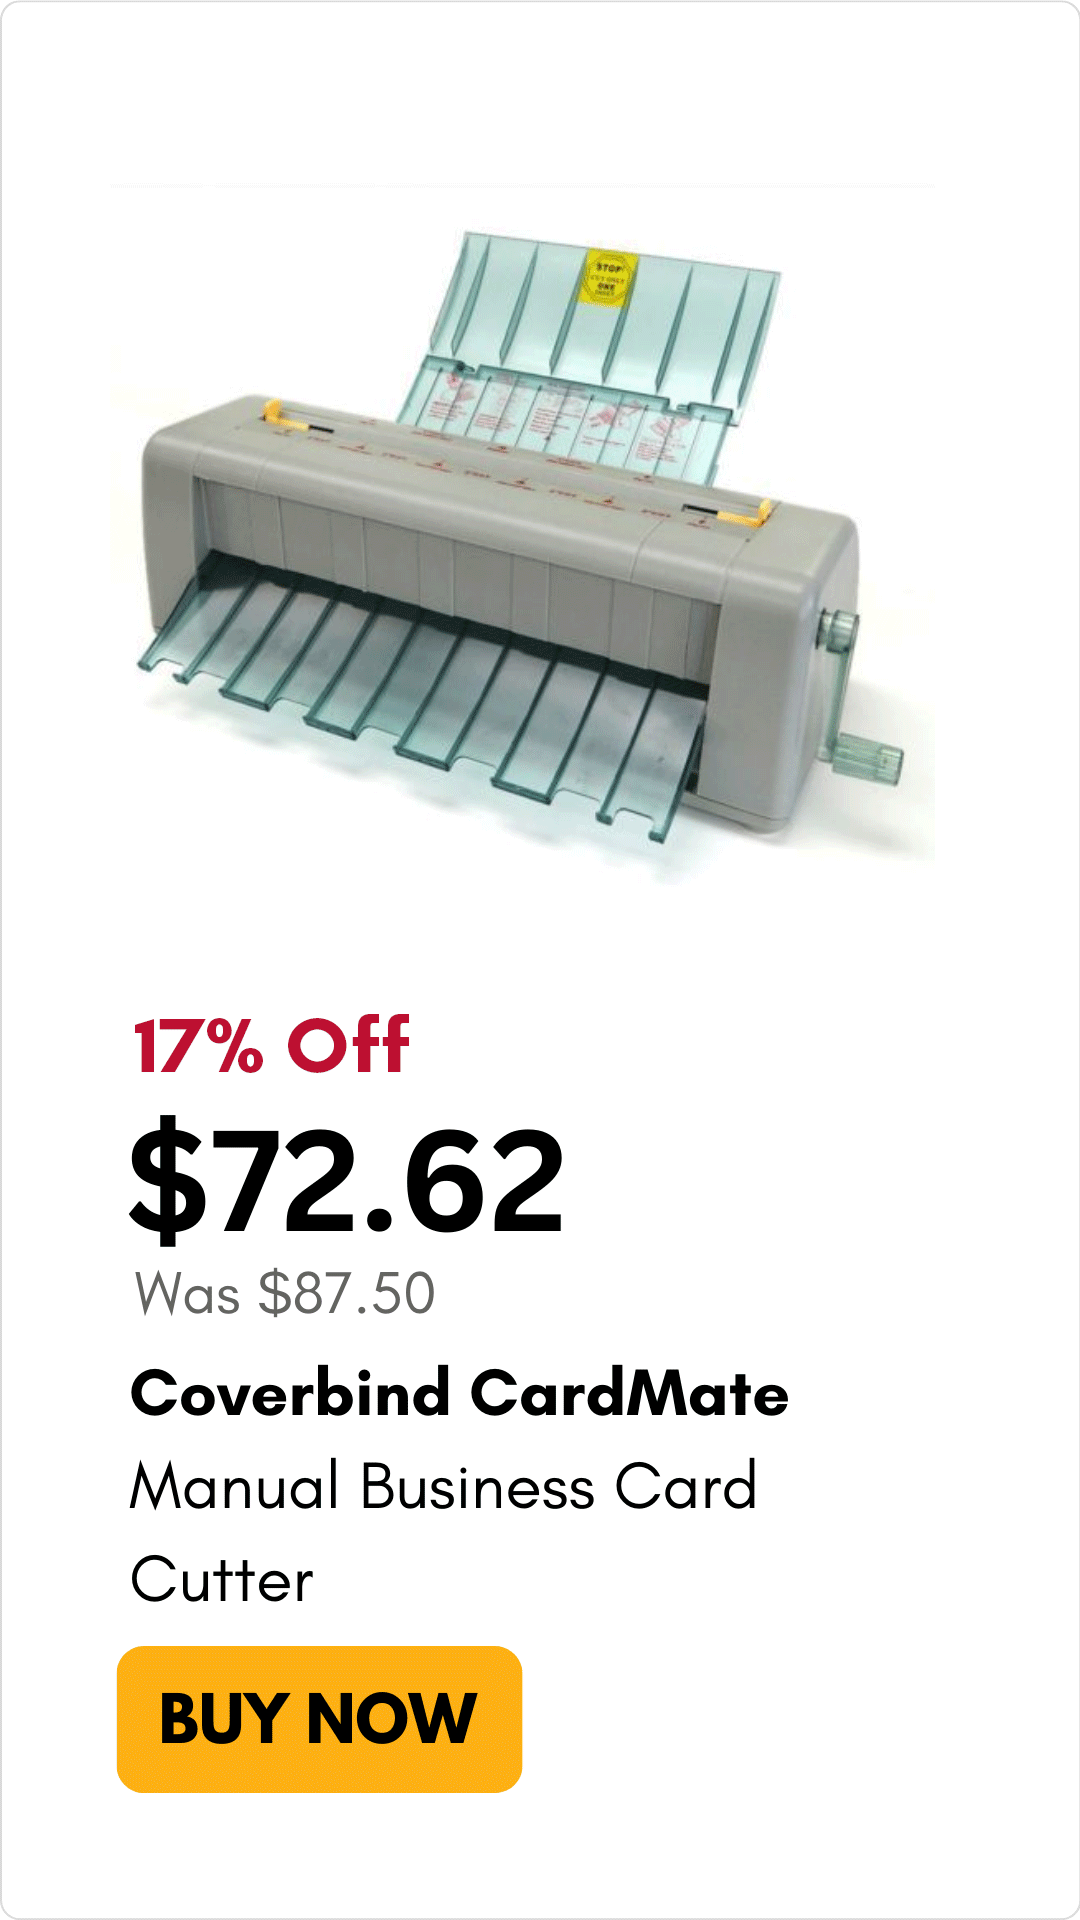 Coverbind CardMate Manual Business Card Cutter on sale for 18% Off